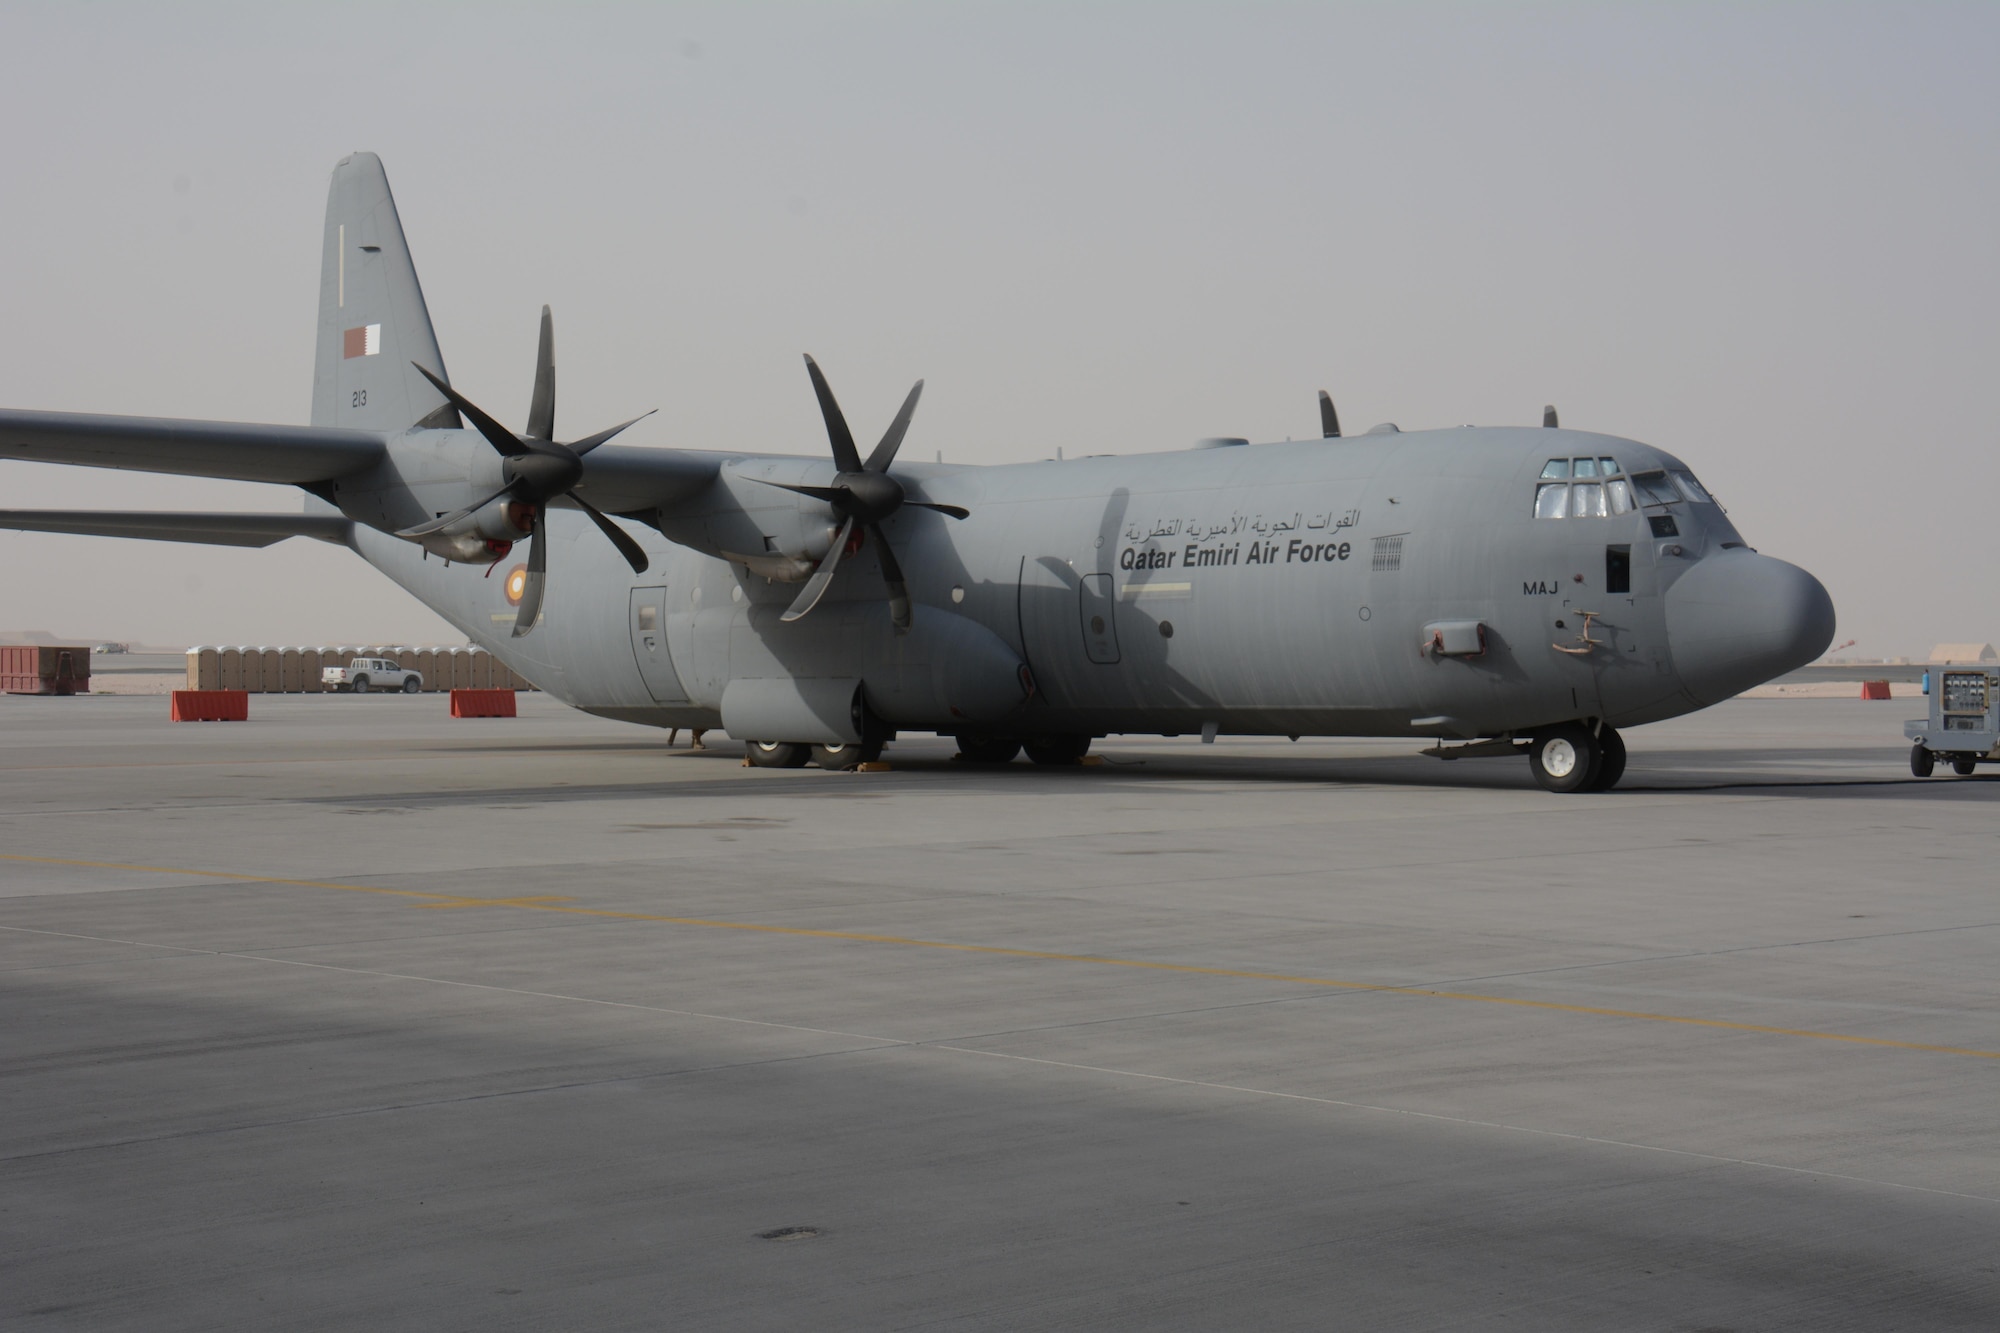 A Qatar Emiri Air Force C-130J waits for visitors at the annual Flight Line Fest Jan. 10 at Al Udeid Air Base, Qatar. The plane, which is used to haul cargo and train paratroopers, was one of four QEAF aircraft on display during the event. Flight Line Fest is a joint partnership between the 379th Air Expeditionary Wing and QEAF held to foster relations between Qatar and the United States. (U.S. Air Force photo by Tech. Sgt. James Hodgman/Released)